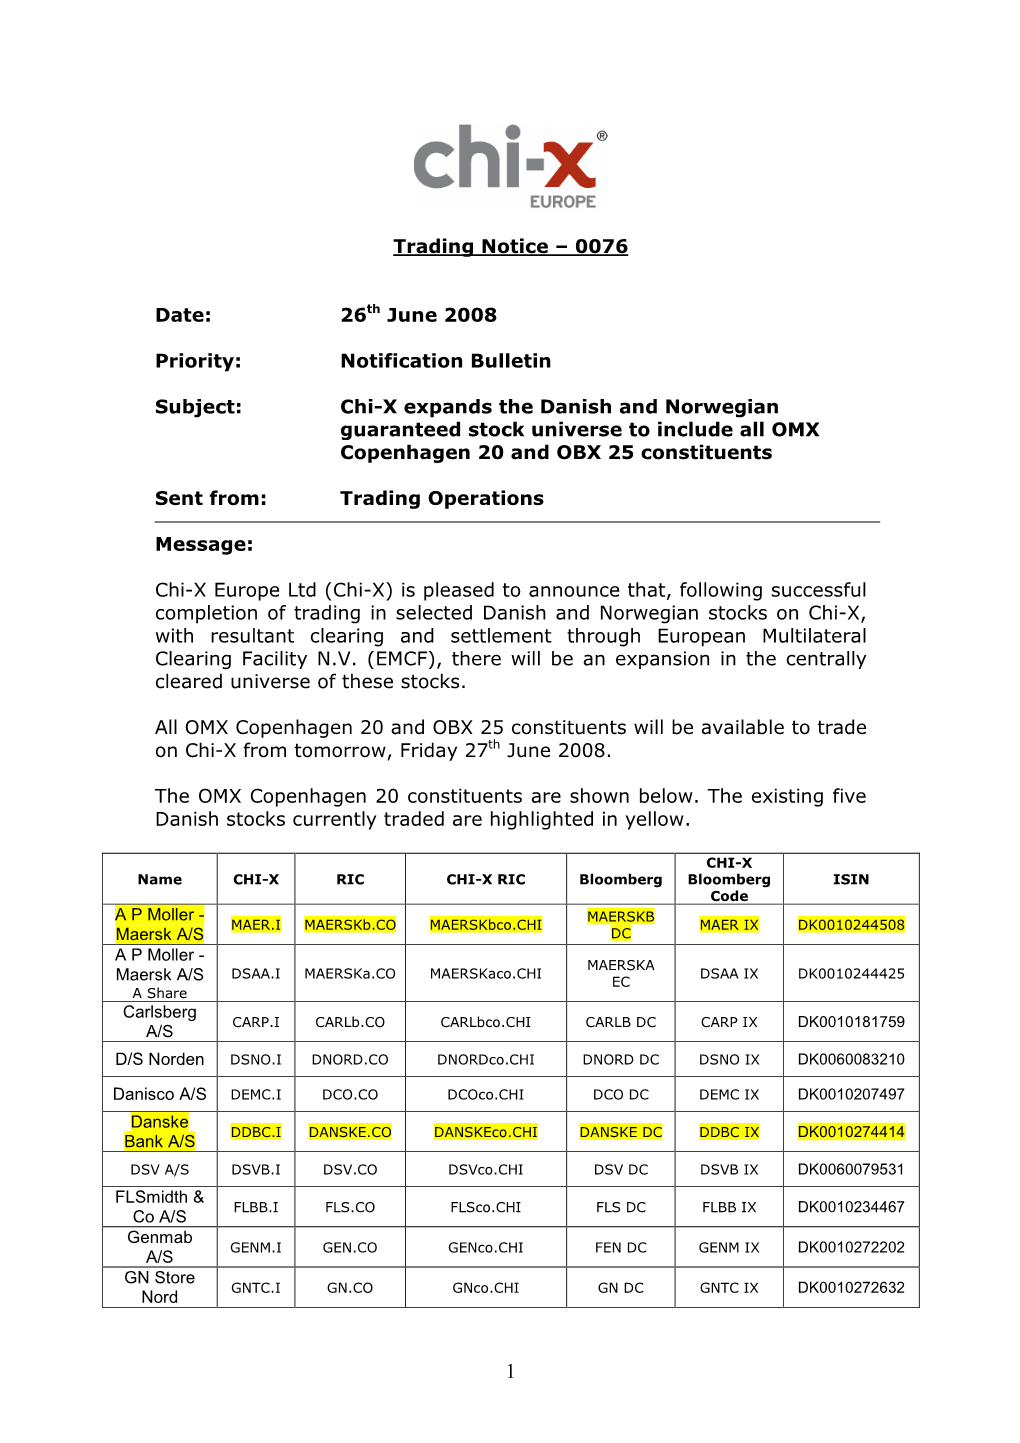 20080626 Trading Notice Functional 0076